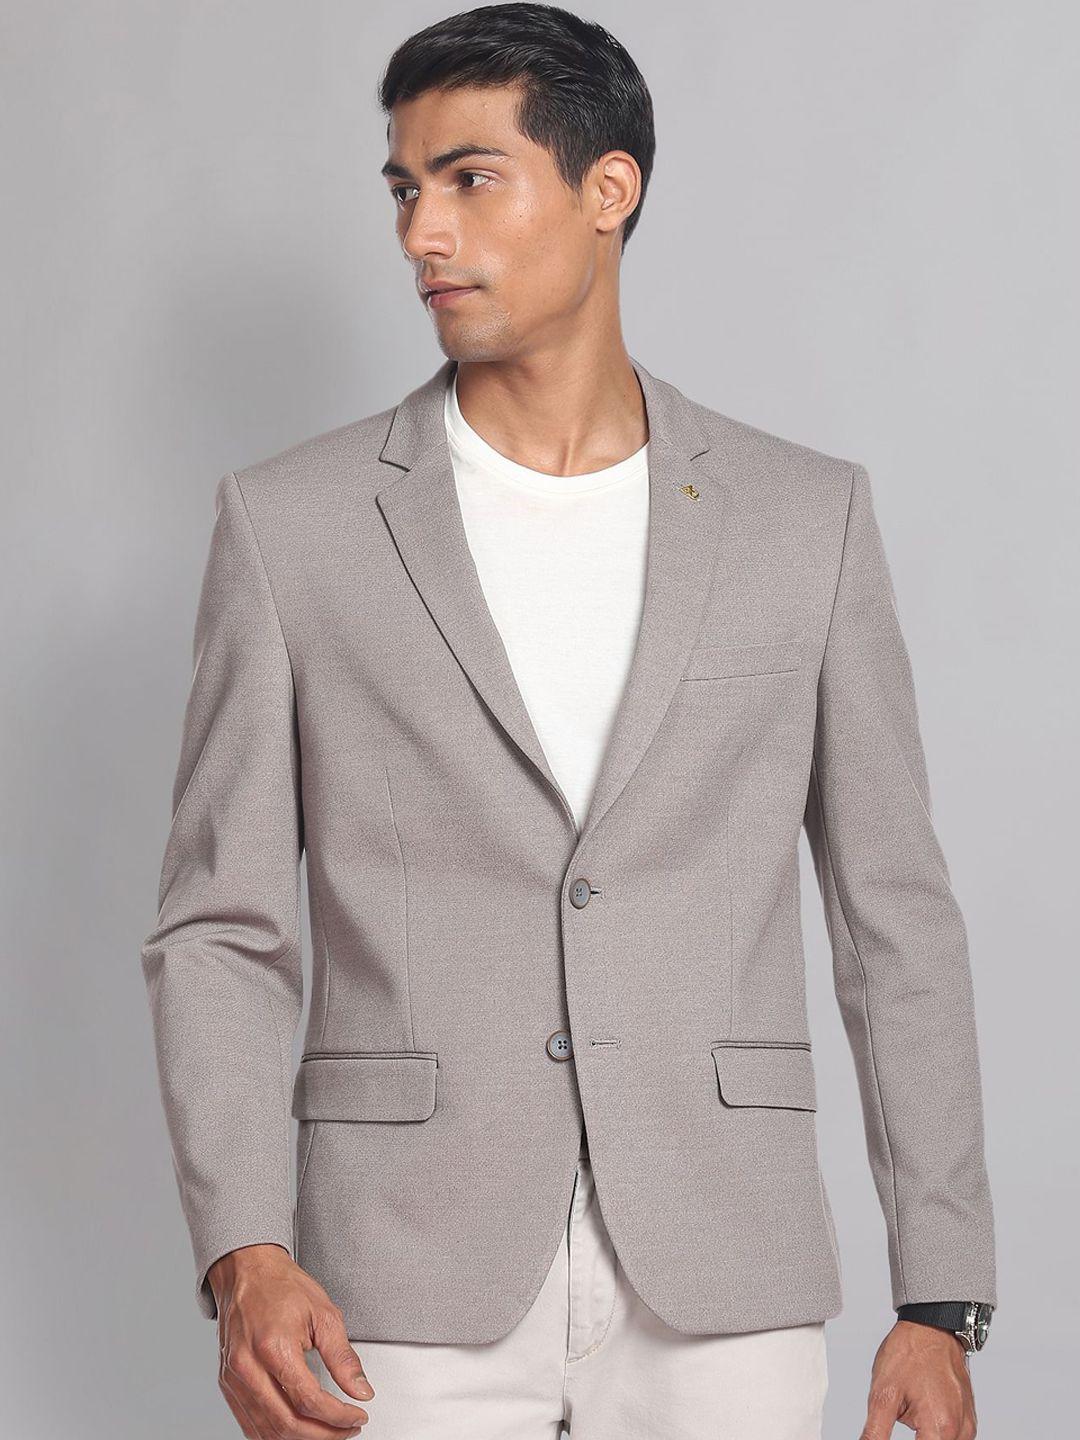 ad by arvind textured knit slim-fit single-breasted blazer